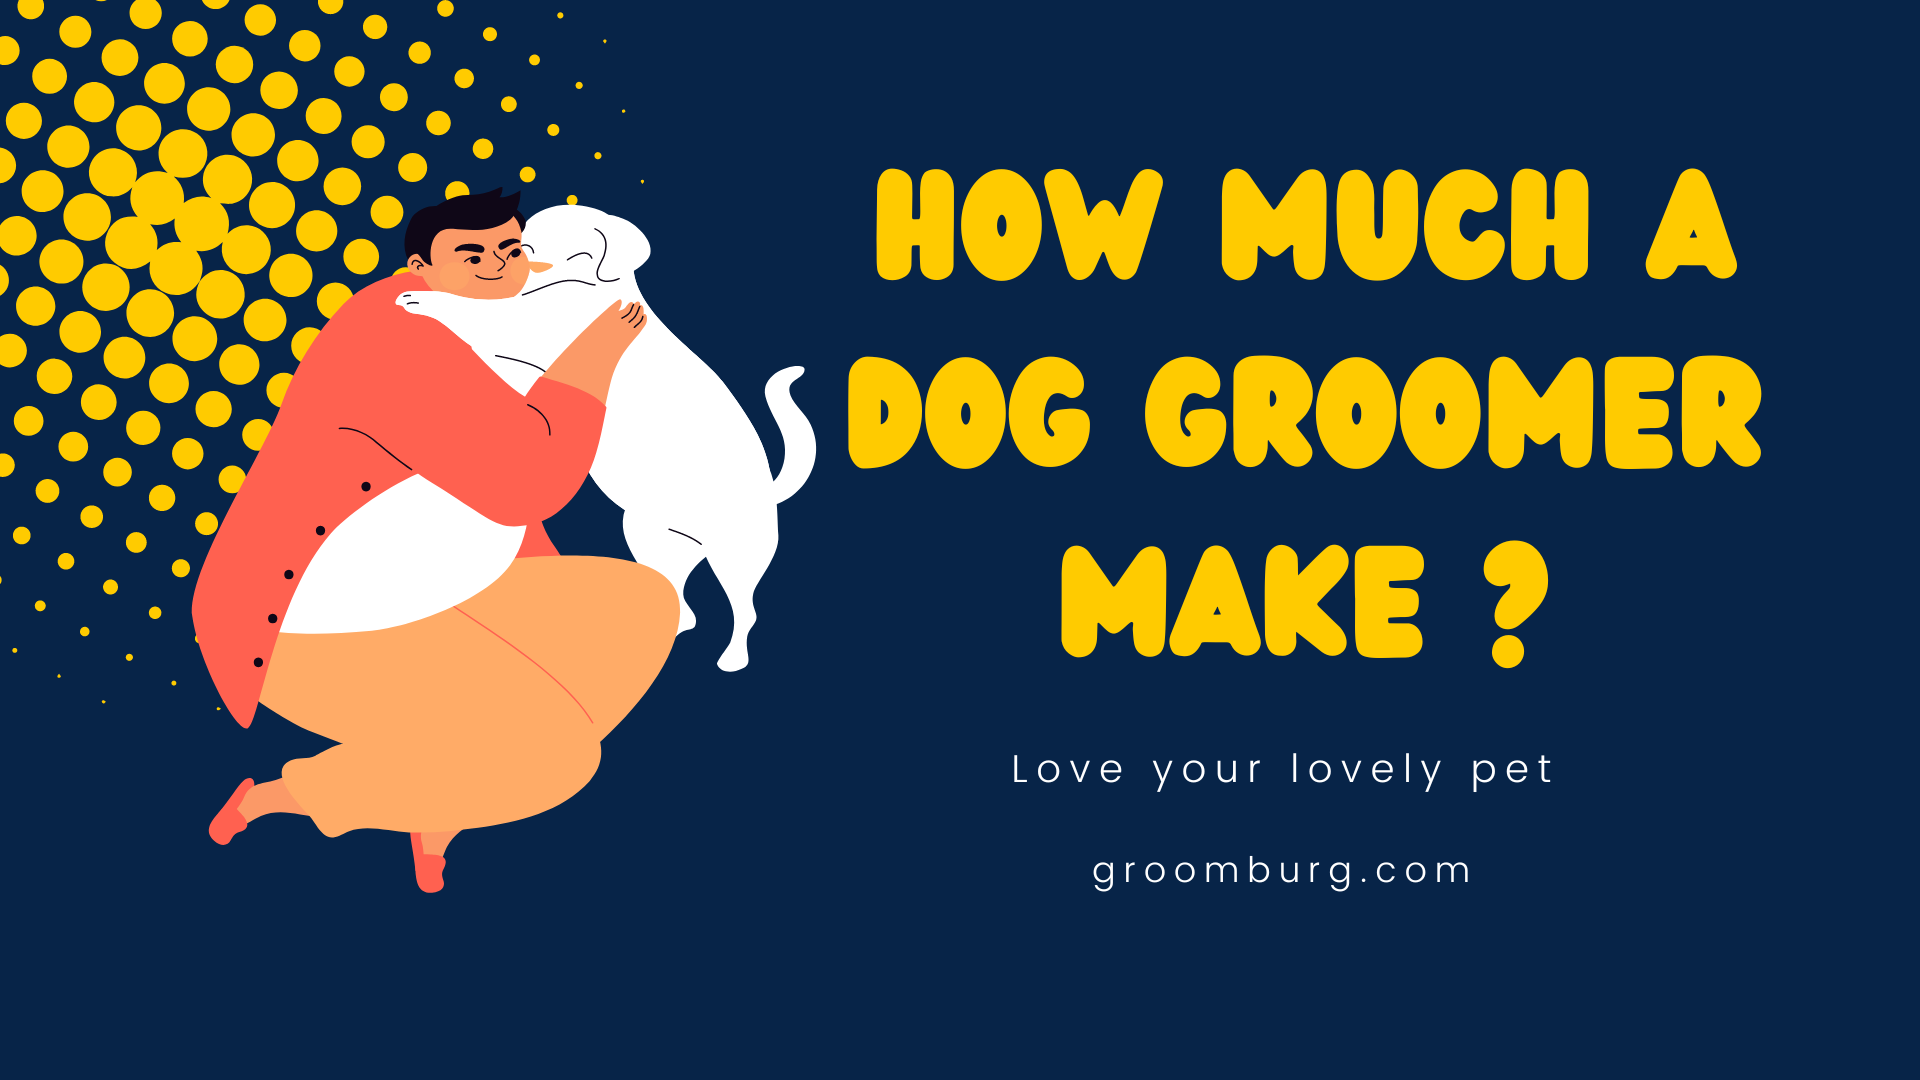 How Much a Dog Groomer Make? Is it a Profitable Business?